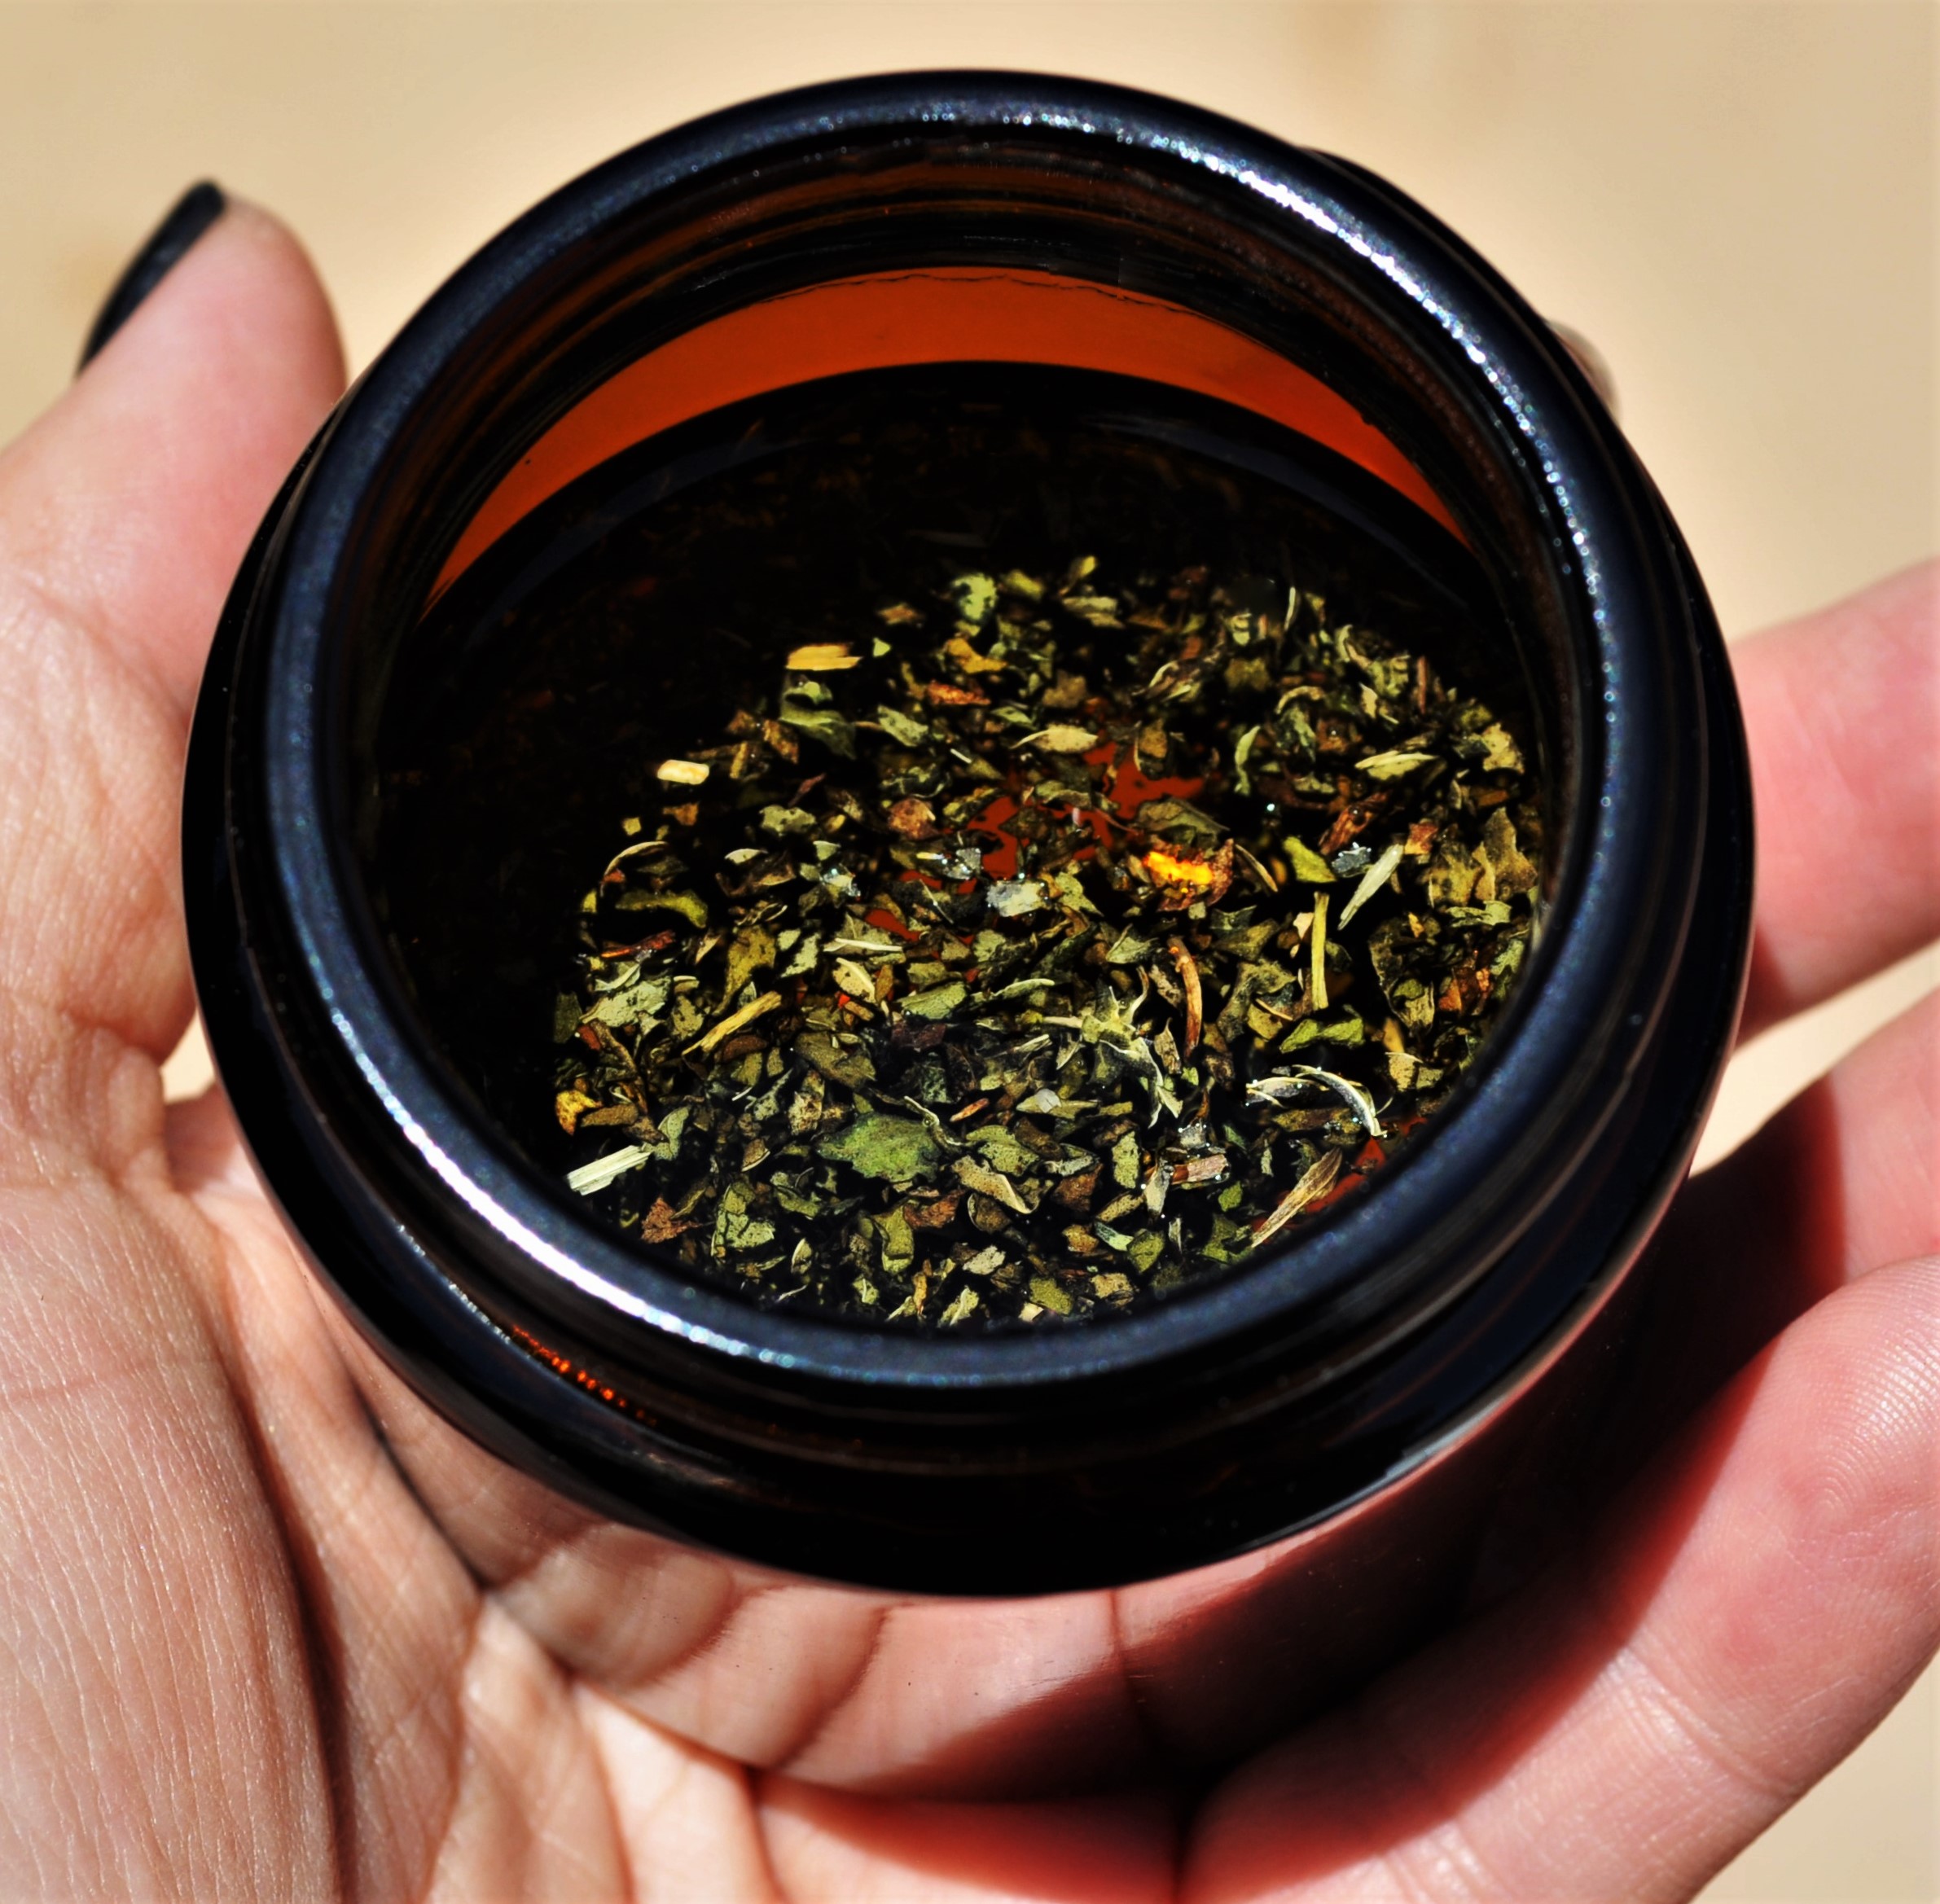 Simply Earth Peppermint Infused Oil Recipe